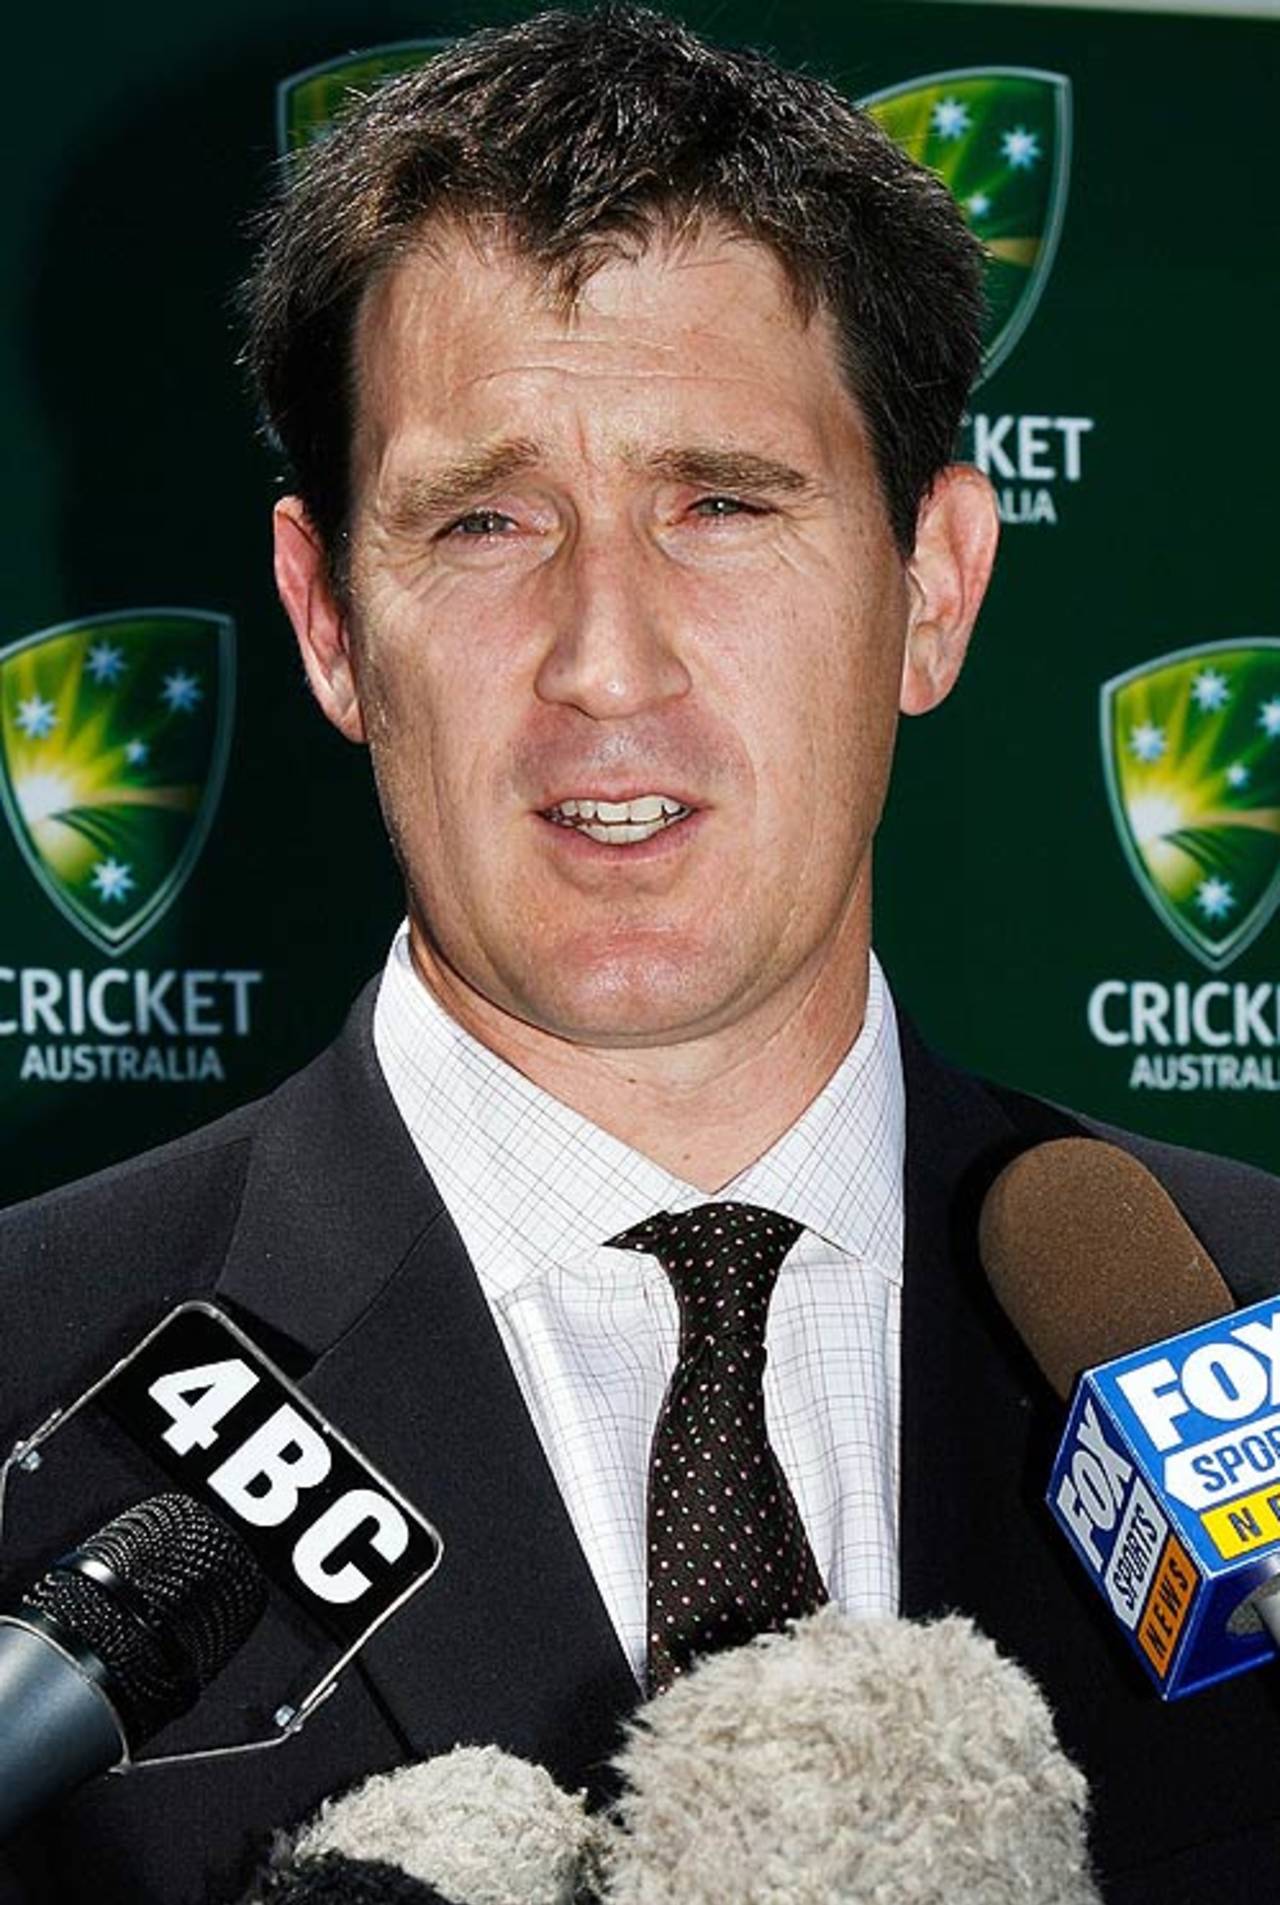 James Sutherland hopes the new centre will help Australia's teams be No.1 in the world&nbsp;&nbsp;&bull;&nbsp;&nbsp;Getty Images